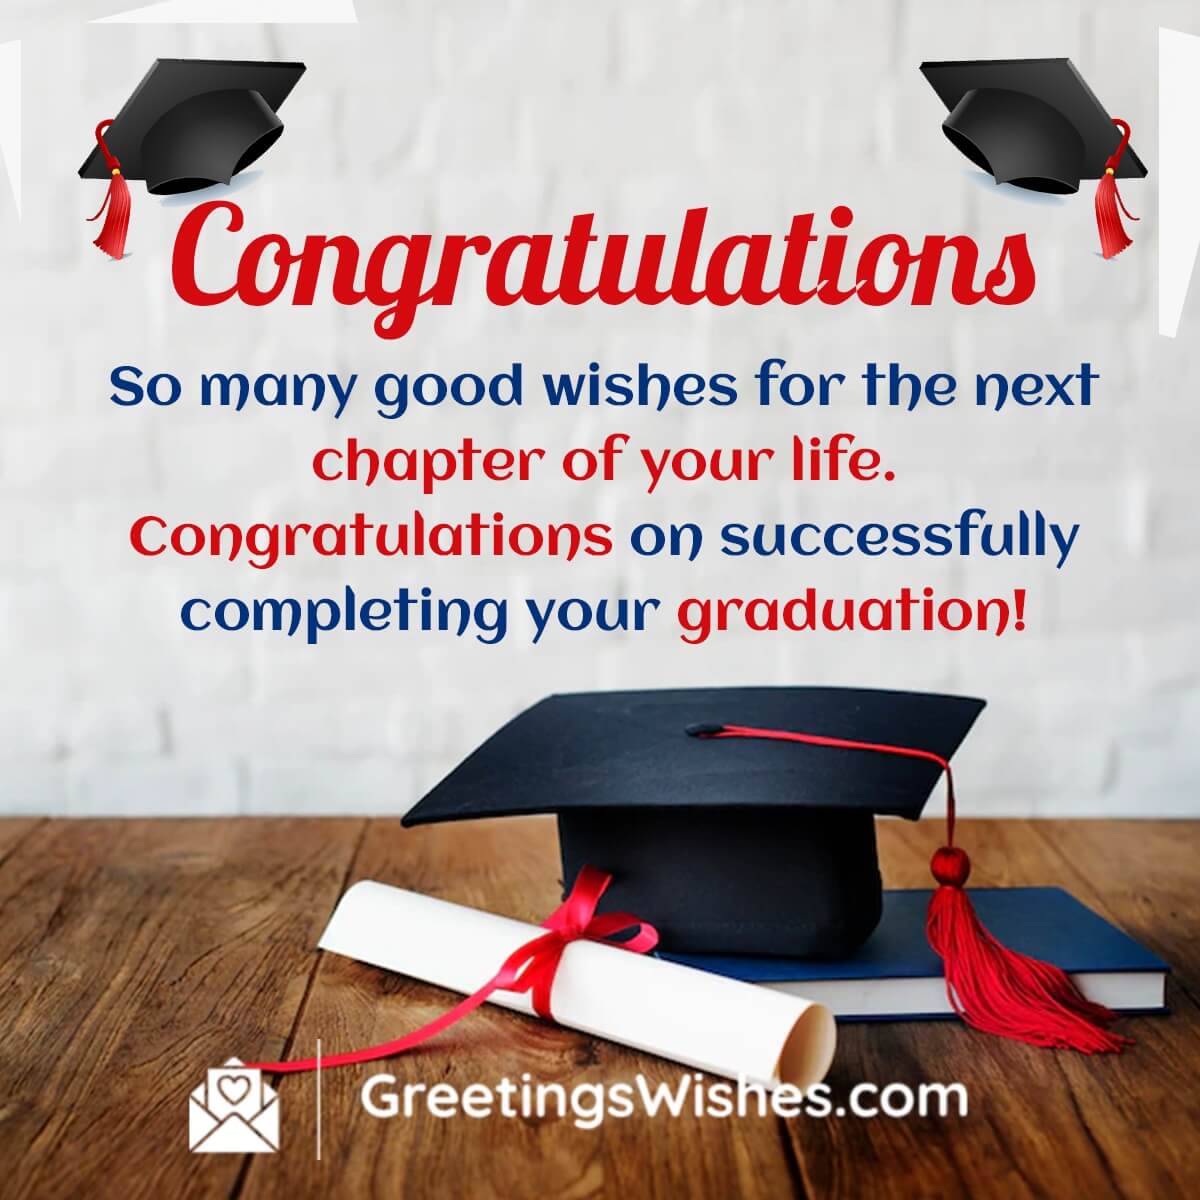 Congratulations Wishes Messages